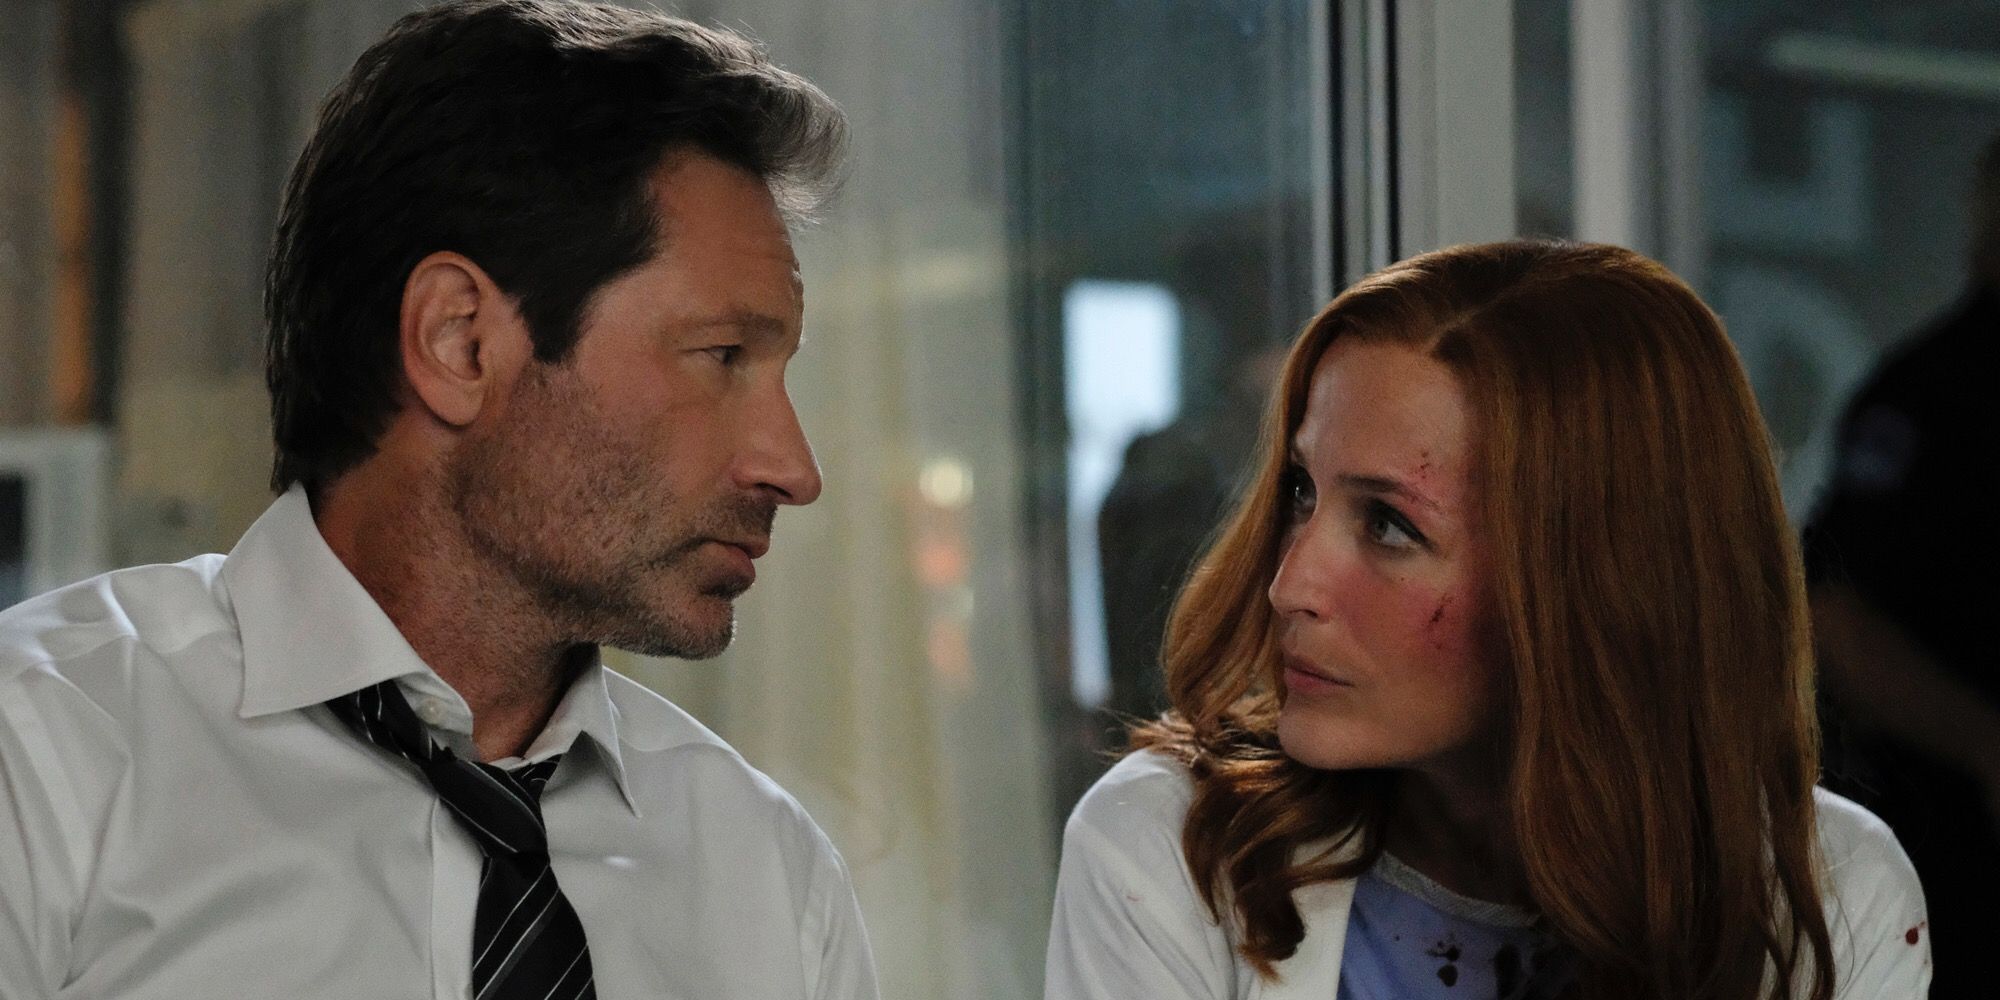 X-Files Season 11 Premiere Review: A Messy Start Leads to Better Episodes